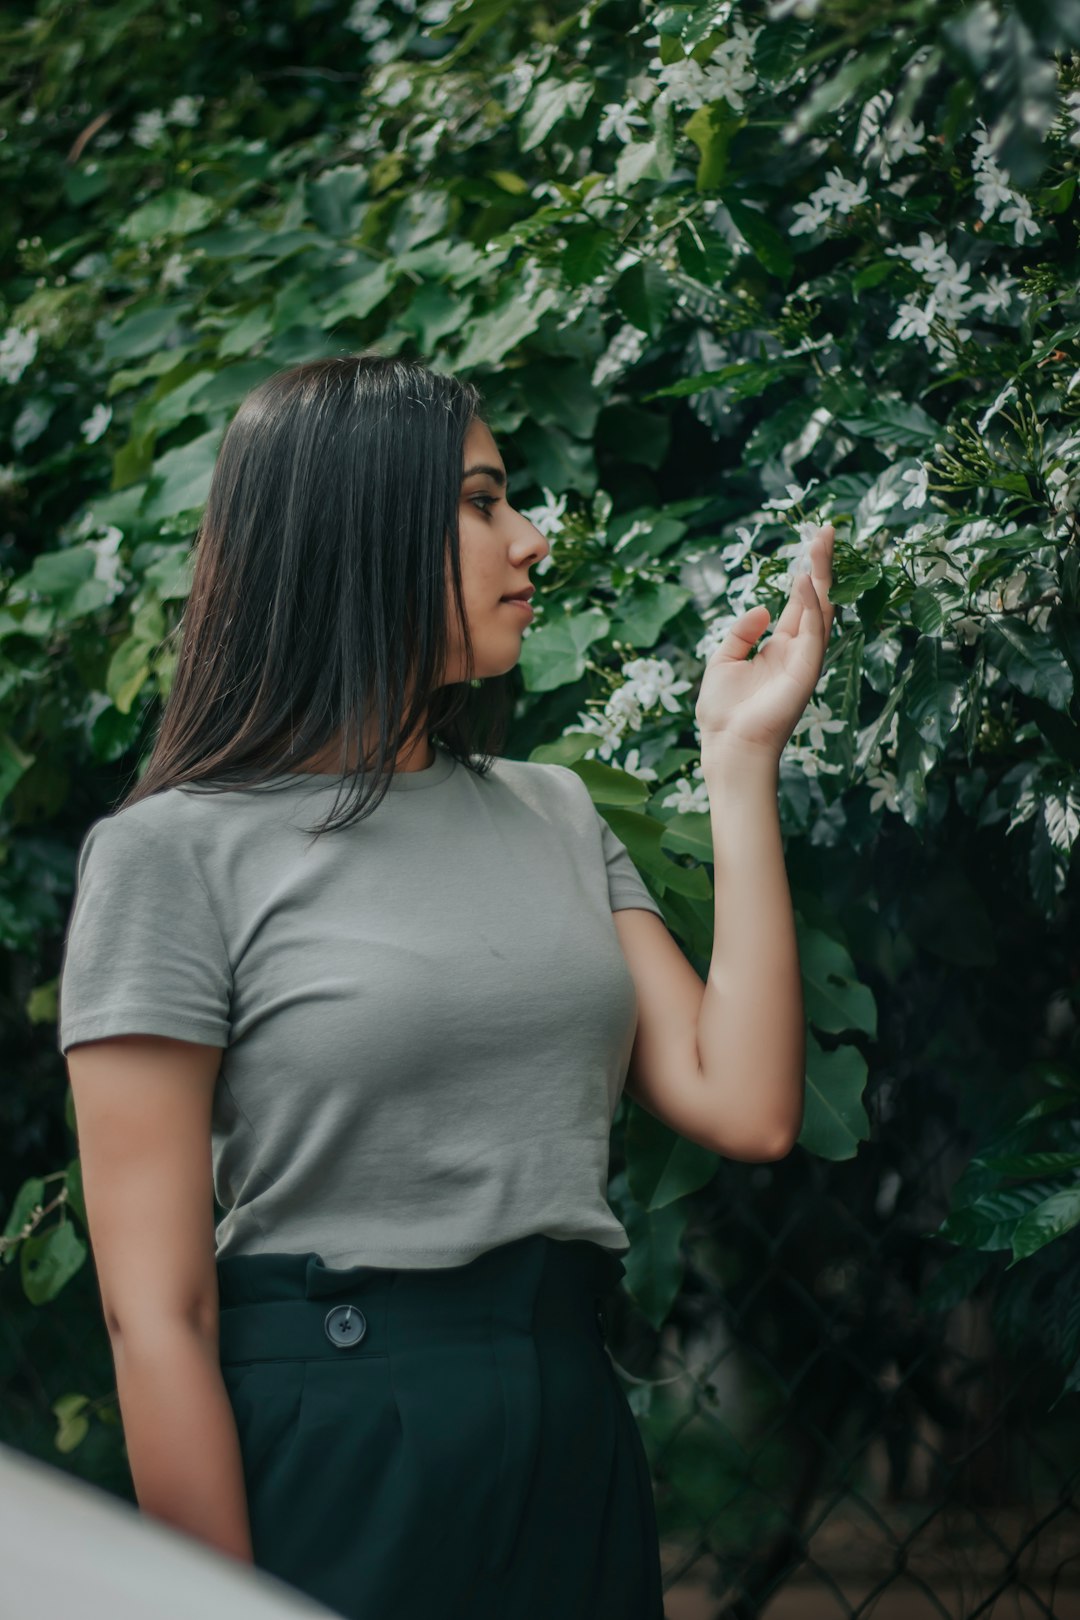 woman in gray t-shirt standing near green leaf plant during daytime